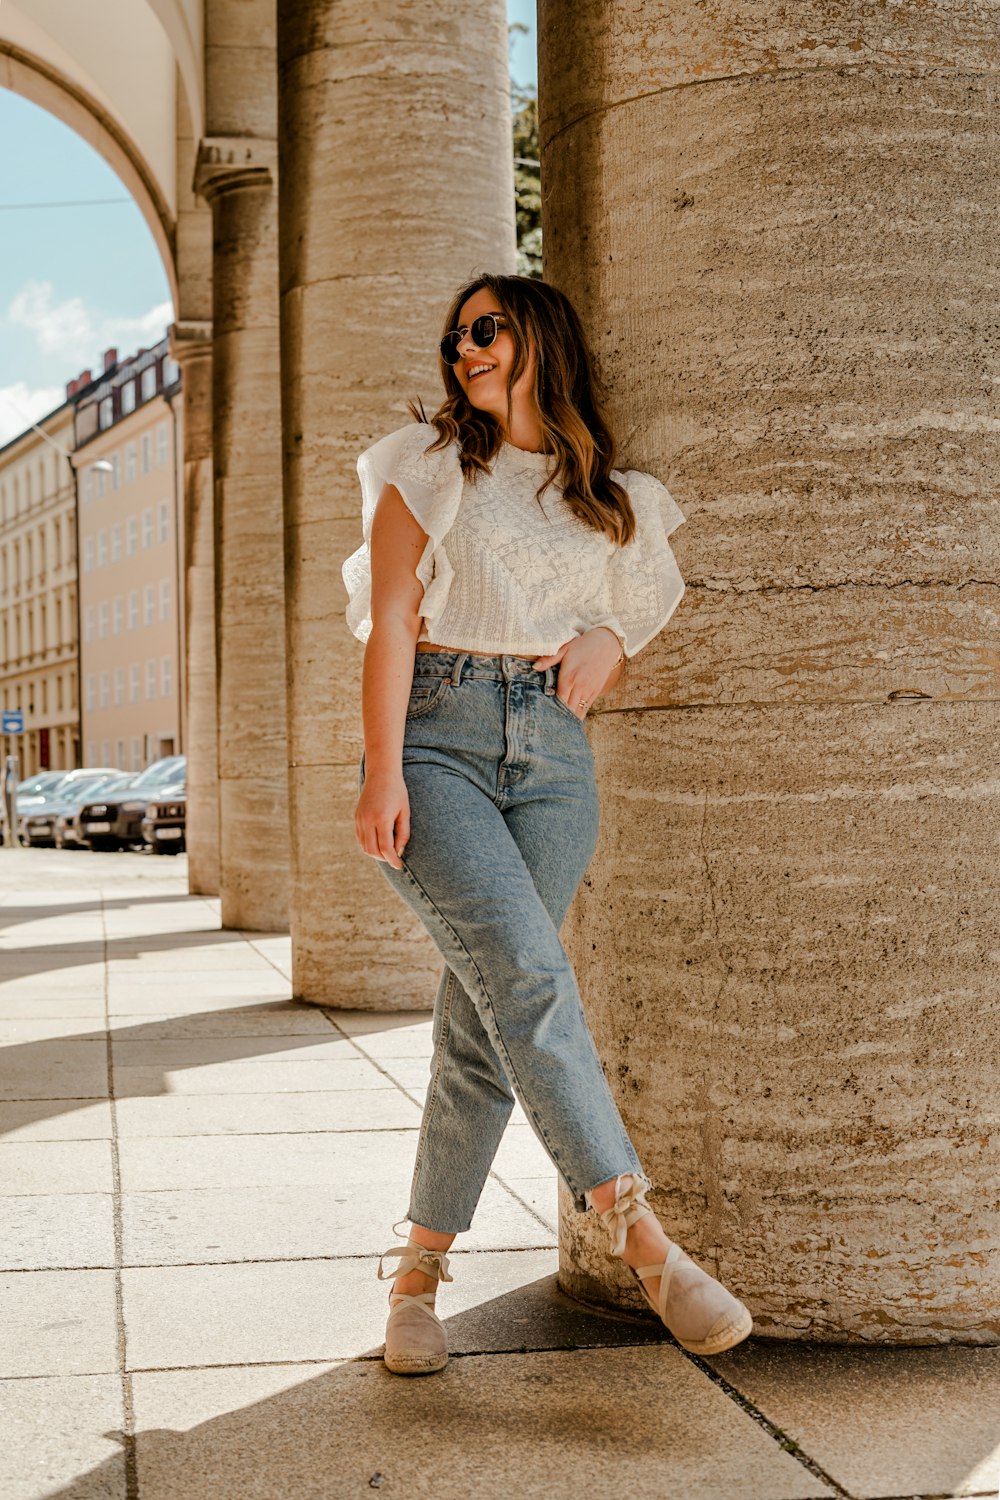 Woman in white tank top and blue denim jeans standing on brown concrete  floor during daytime photo – Free Omoda Image on Unsplash